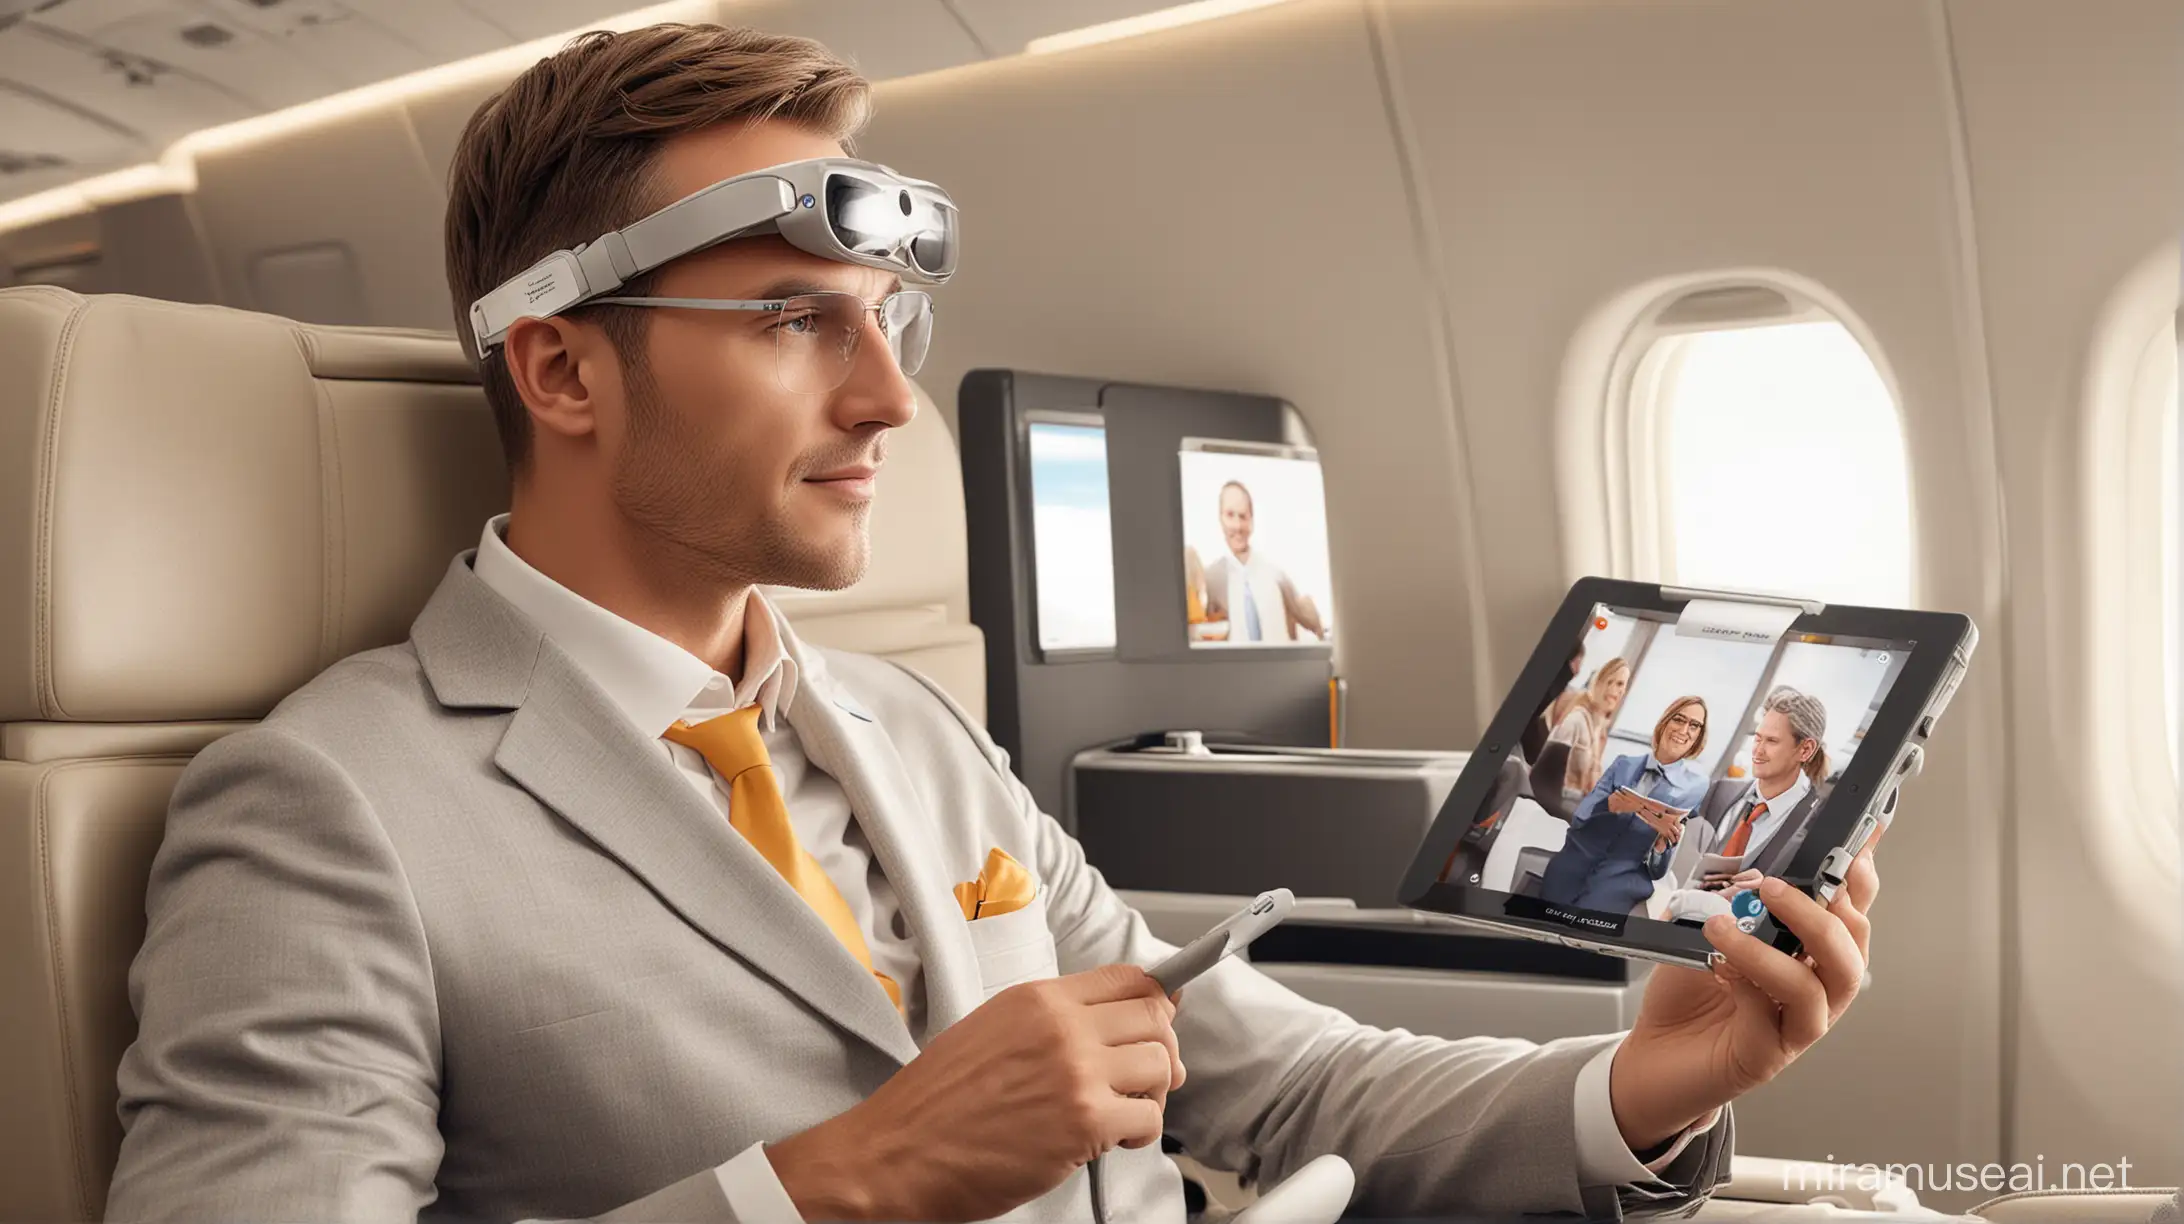 create a image of a person who is very rich sitting in a first class cabin of Lufthansa wearing apple vision pro on his head and a tablet in hand